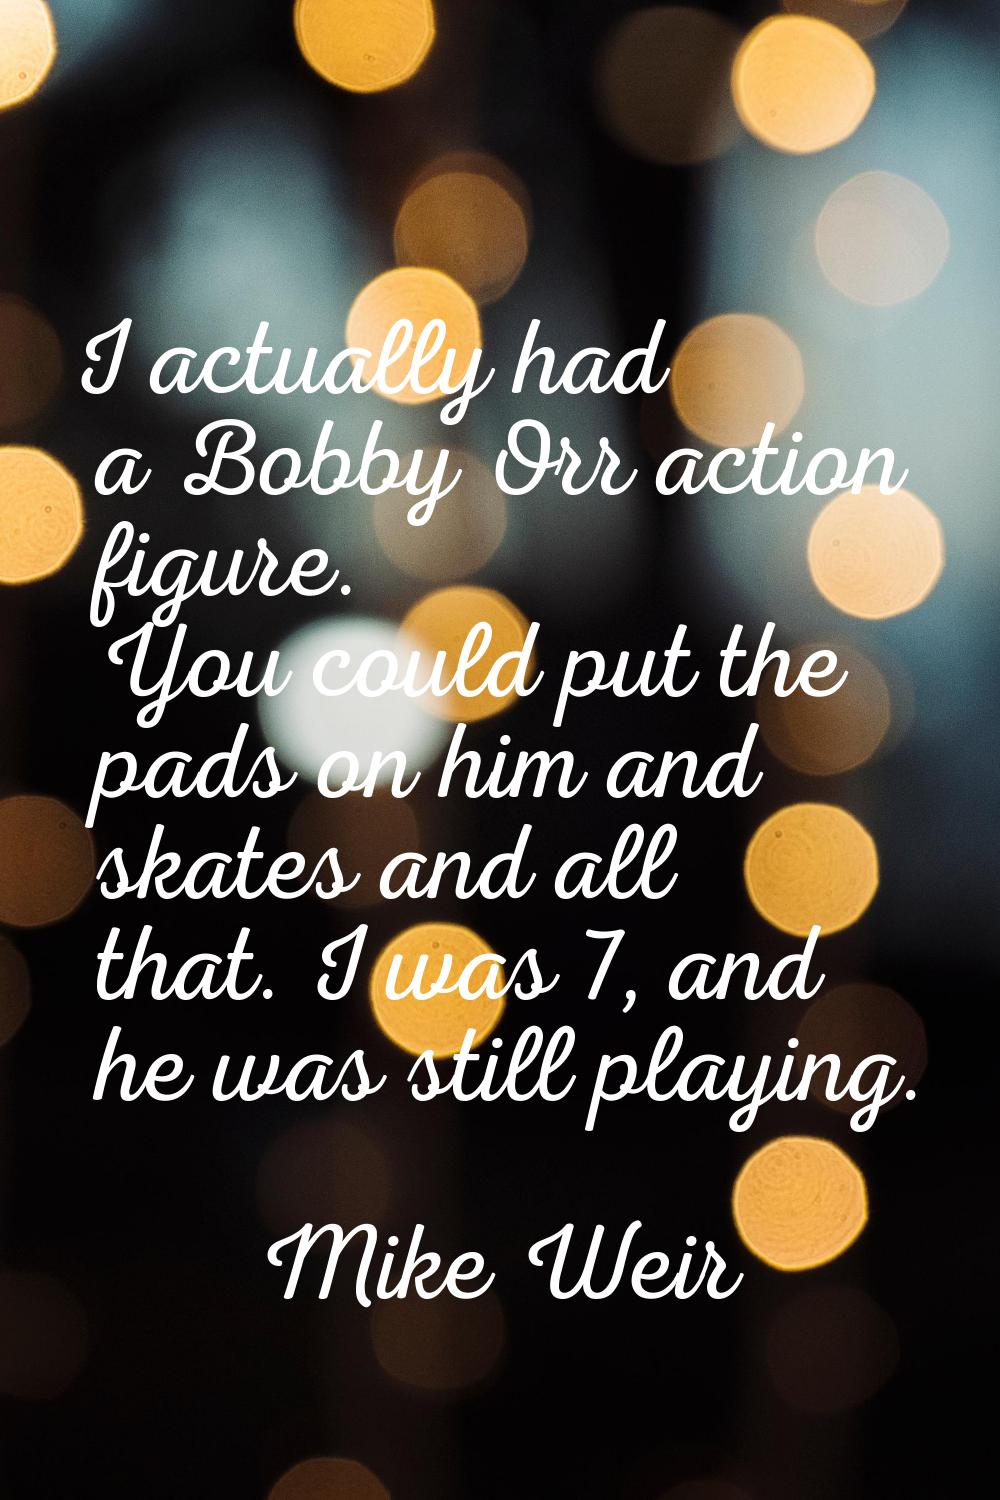 I actually had a Bobby Orr action figure. You could put the pads on him and skates and all that. I 